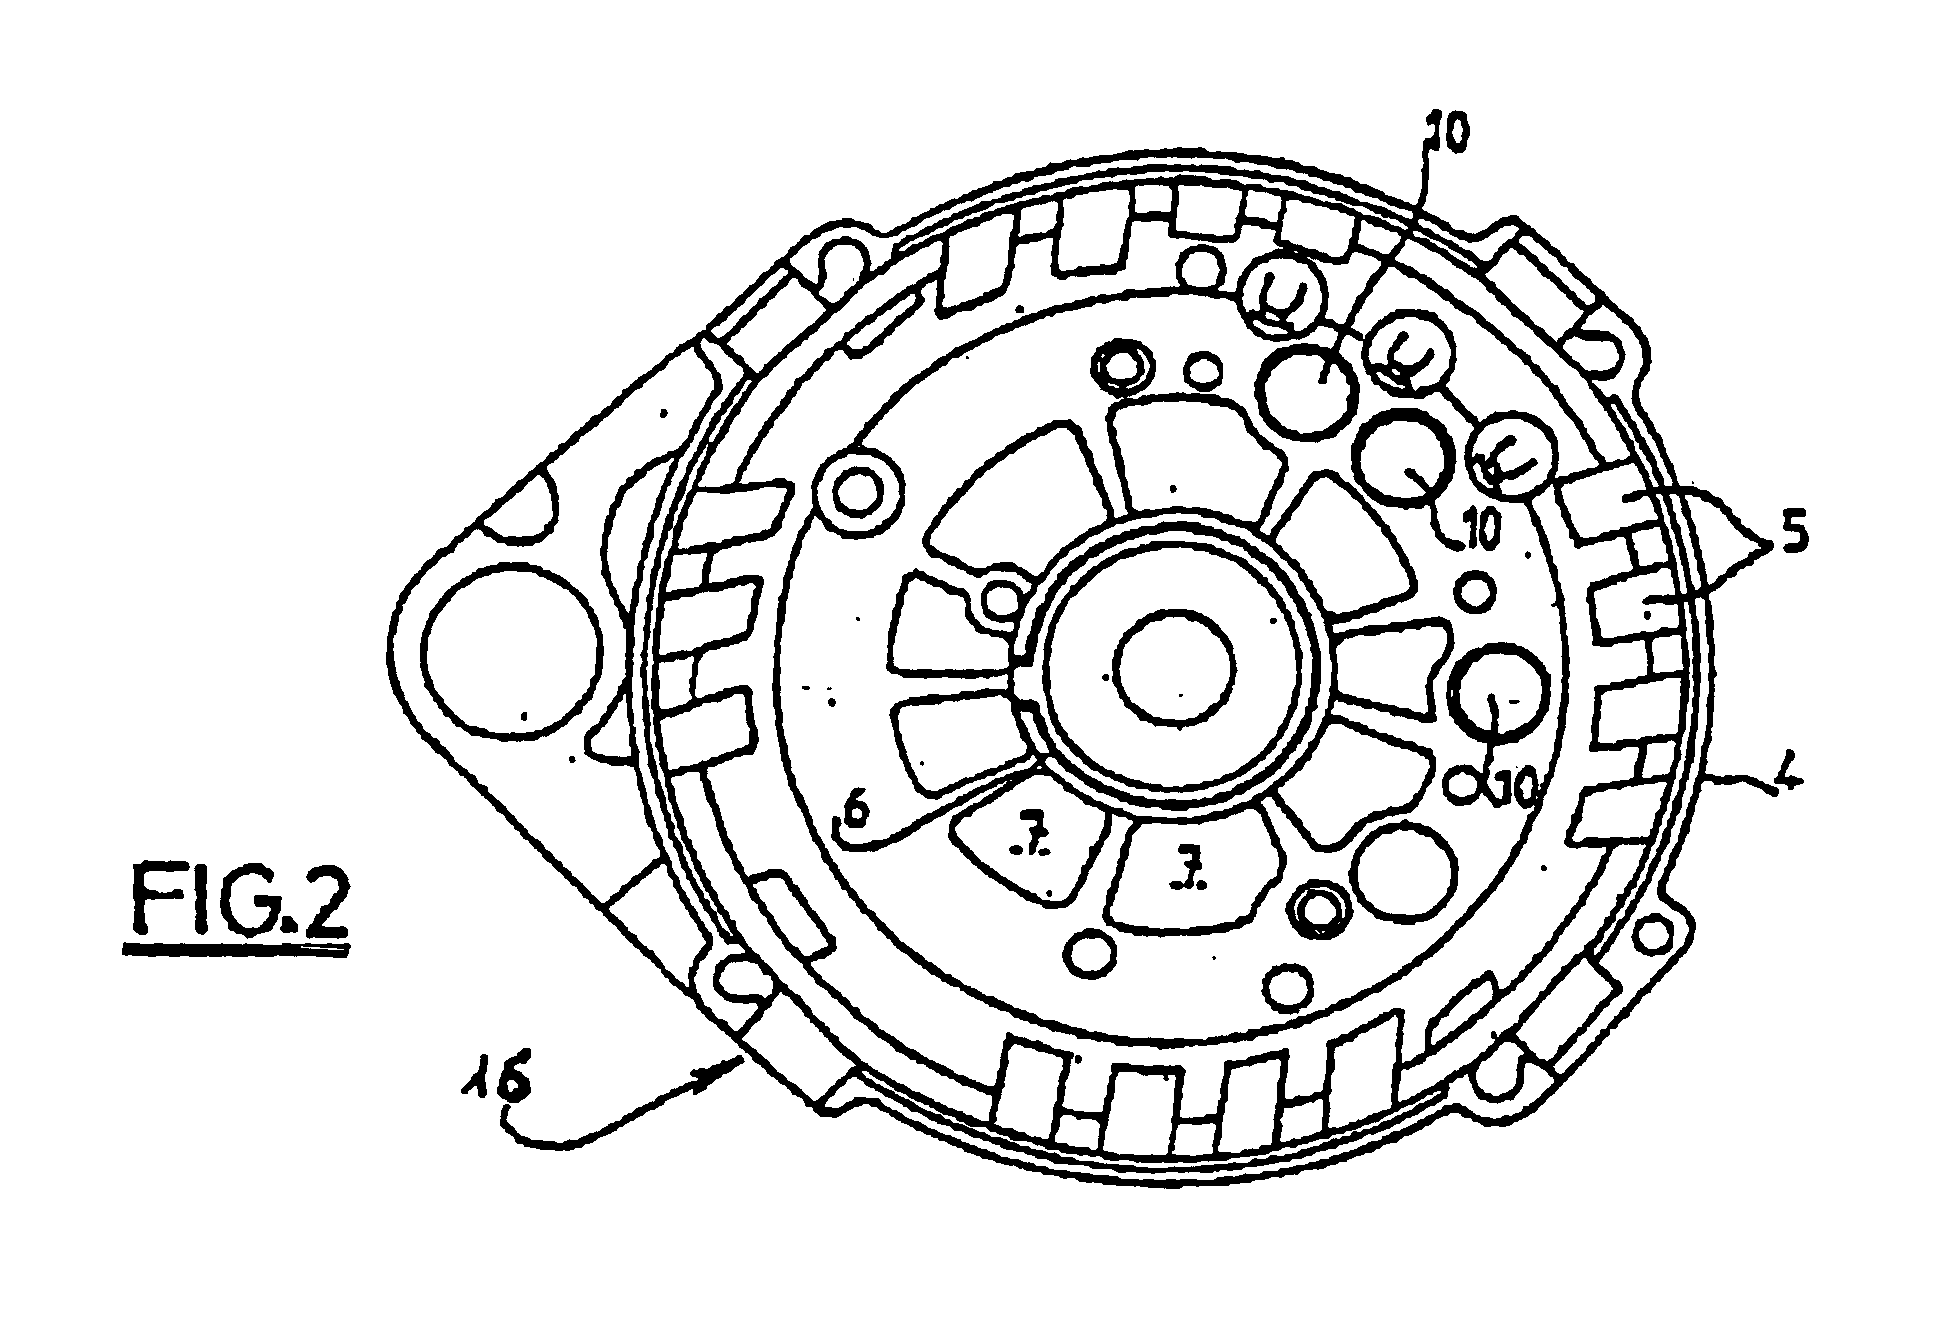 Rotating electrical machine, in particular alternator for motor vehicle